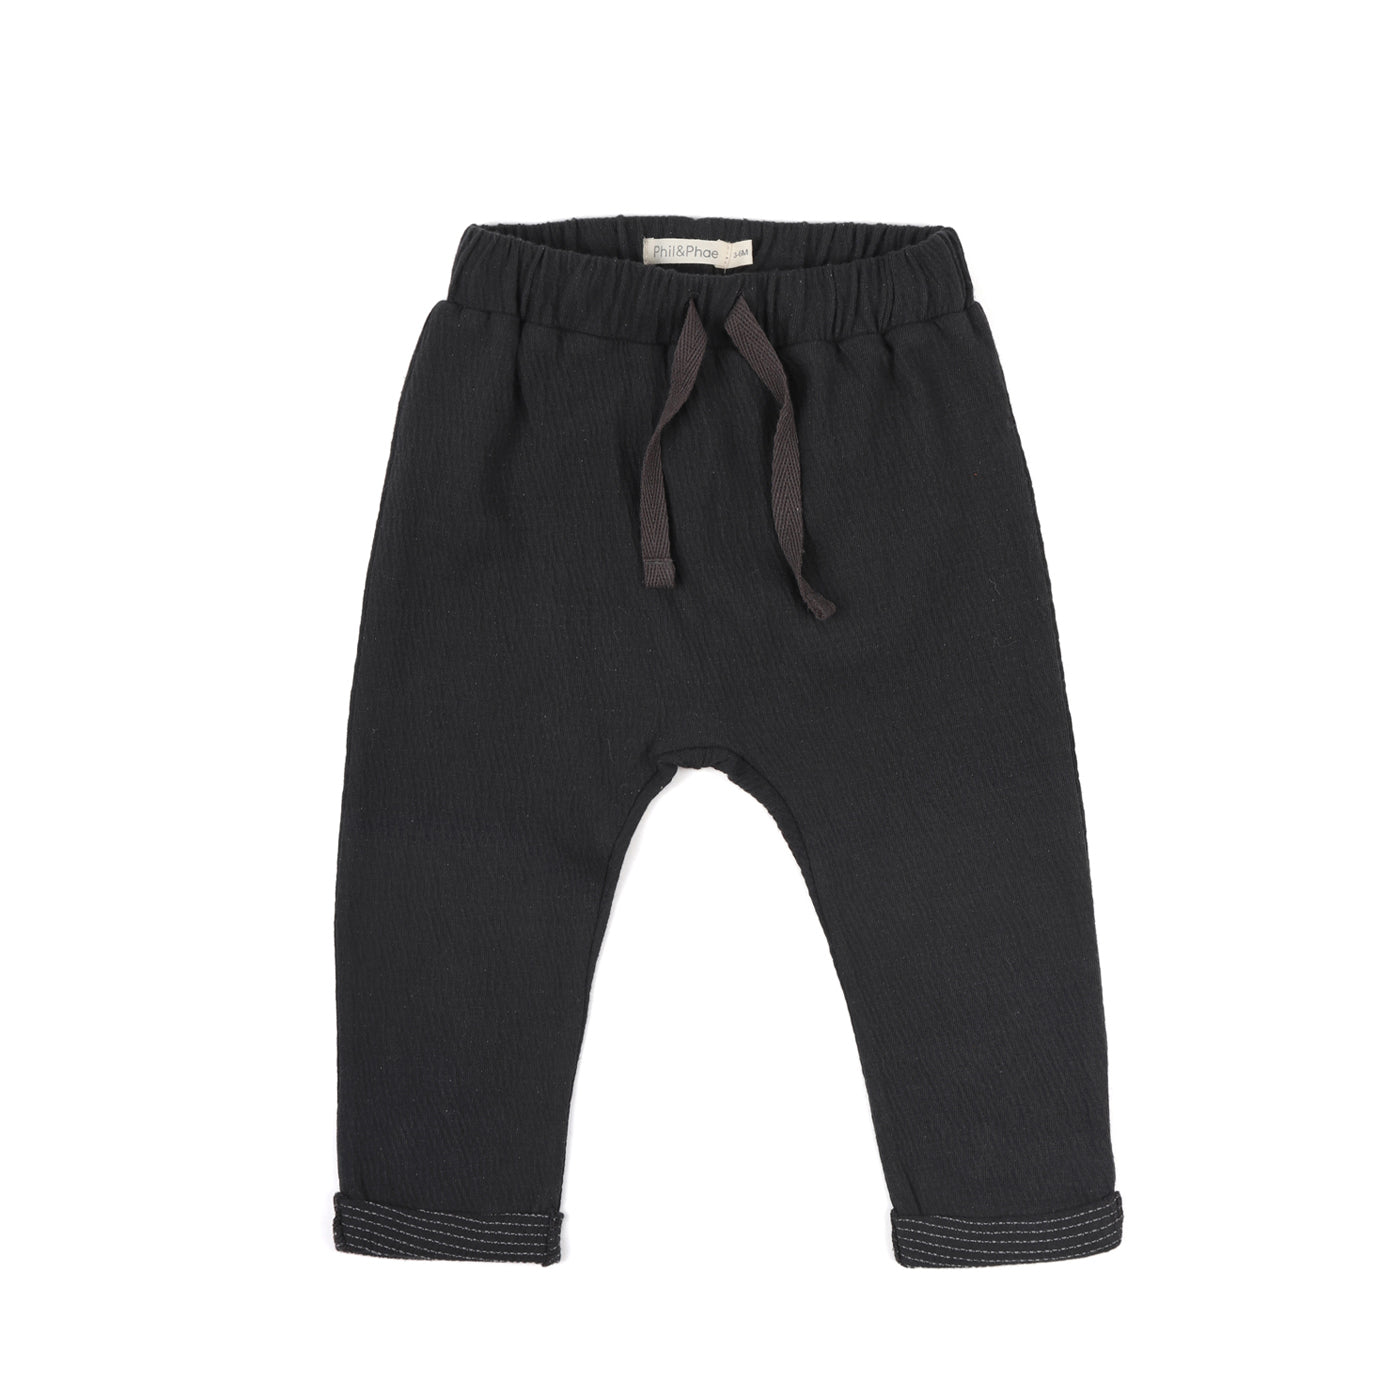 Textured baby pants, charcoal